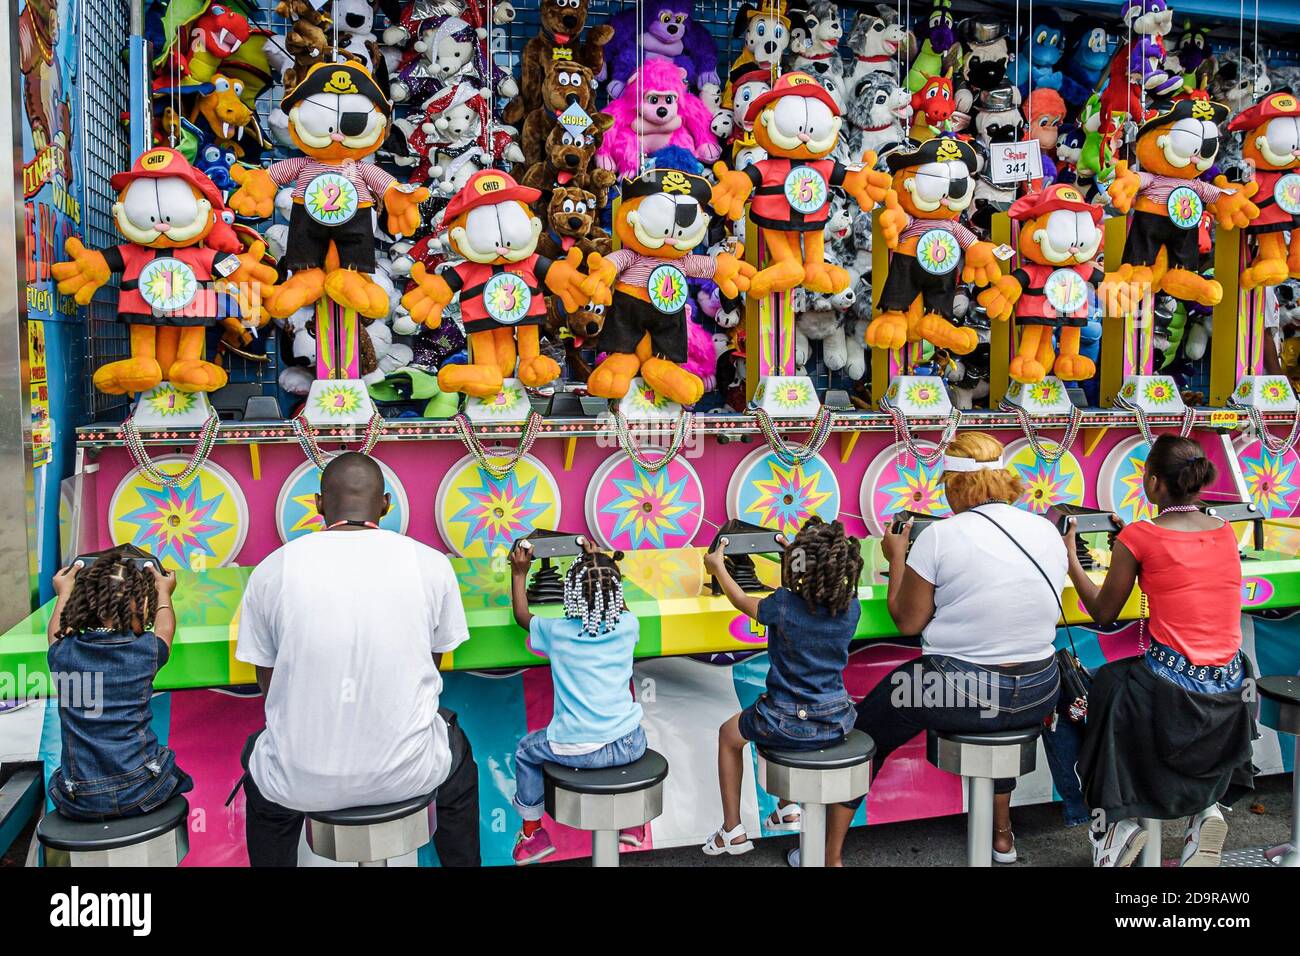 Miami Florida,Dade County Fair & Exposition,annual event carnival midway game prizes stuffed animals,people playing Black African girl girls man, Stock Photo